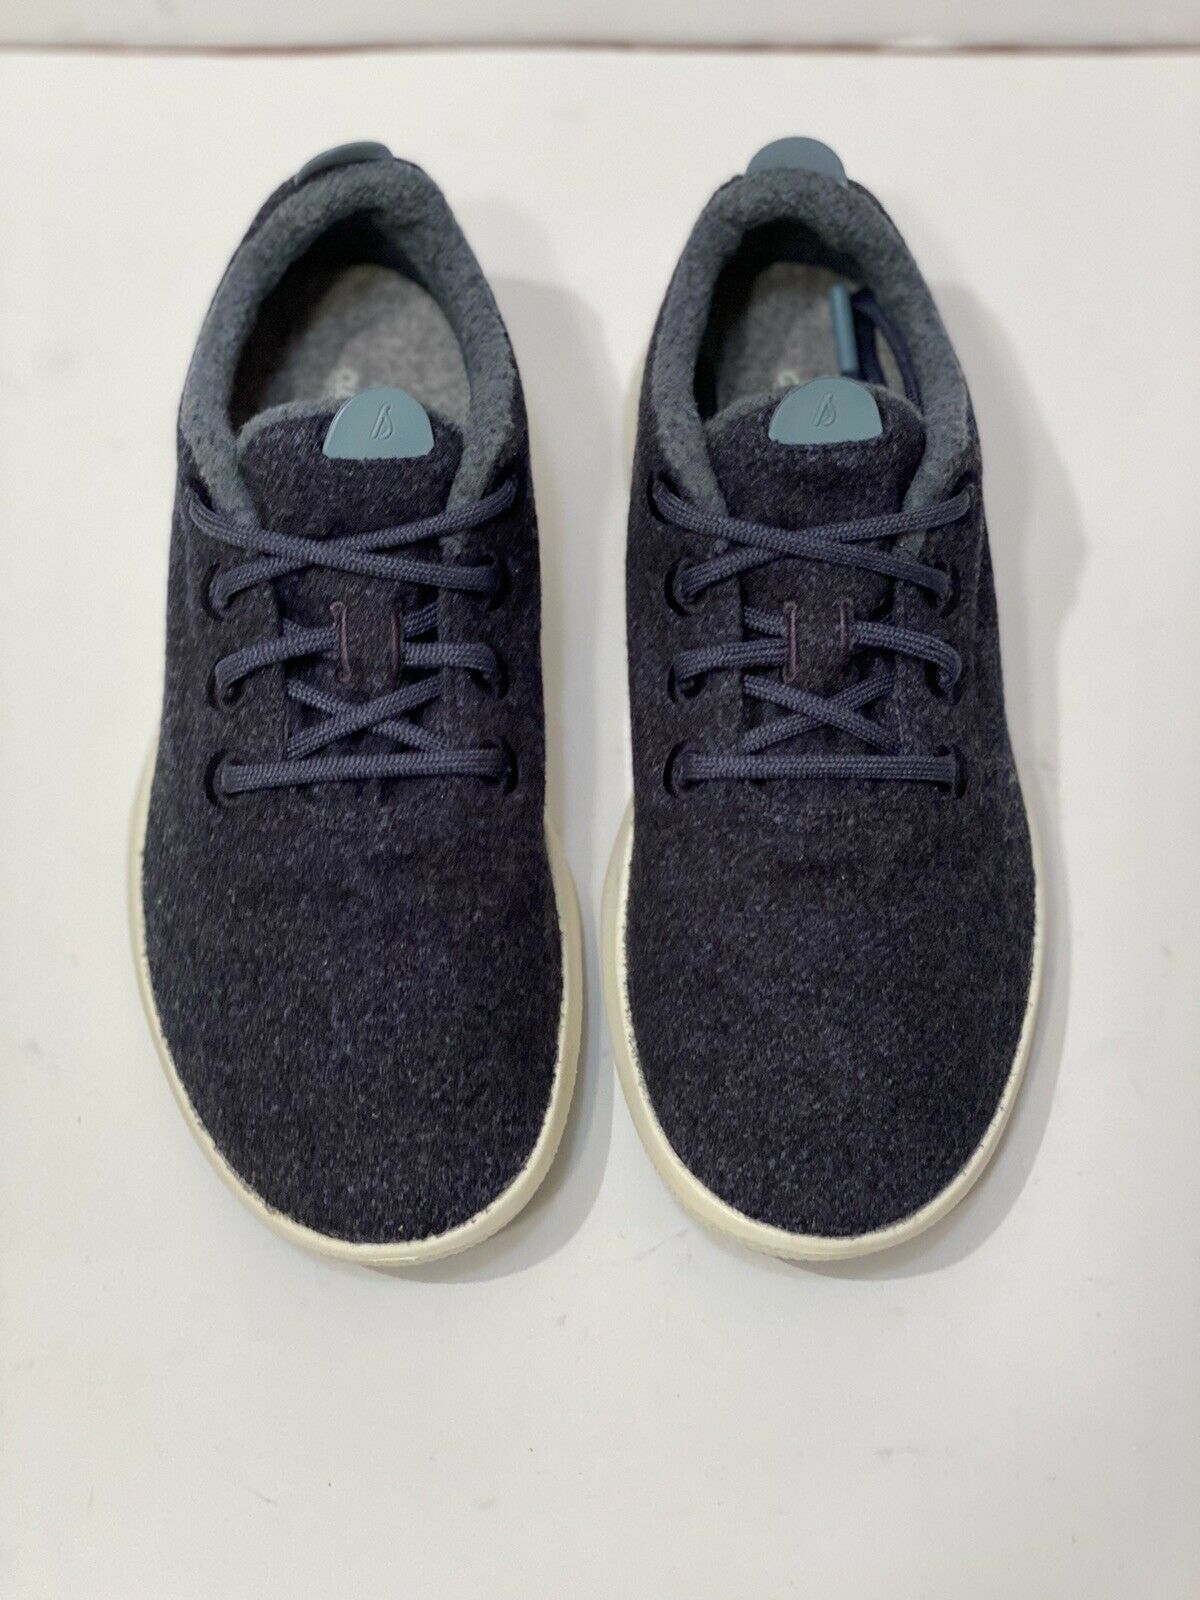 Allbirds Womens Size 10 WR Wool Runner Mizzle Lace Up Low Top Sneaker Shoes